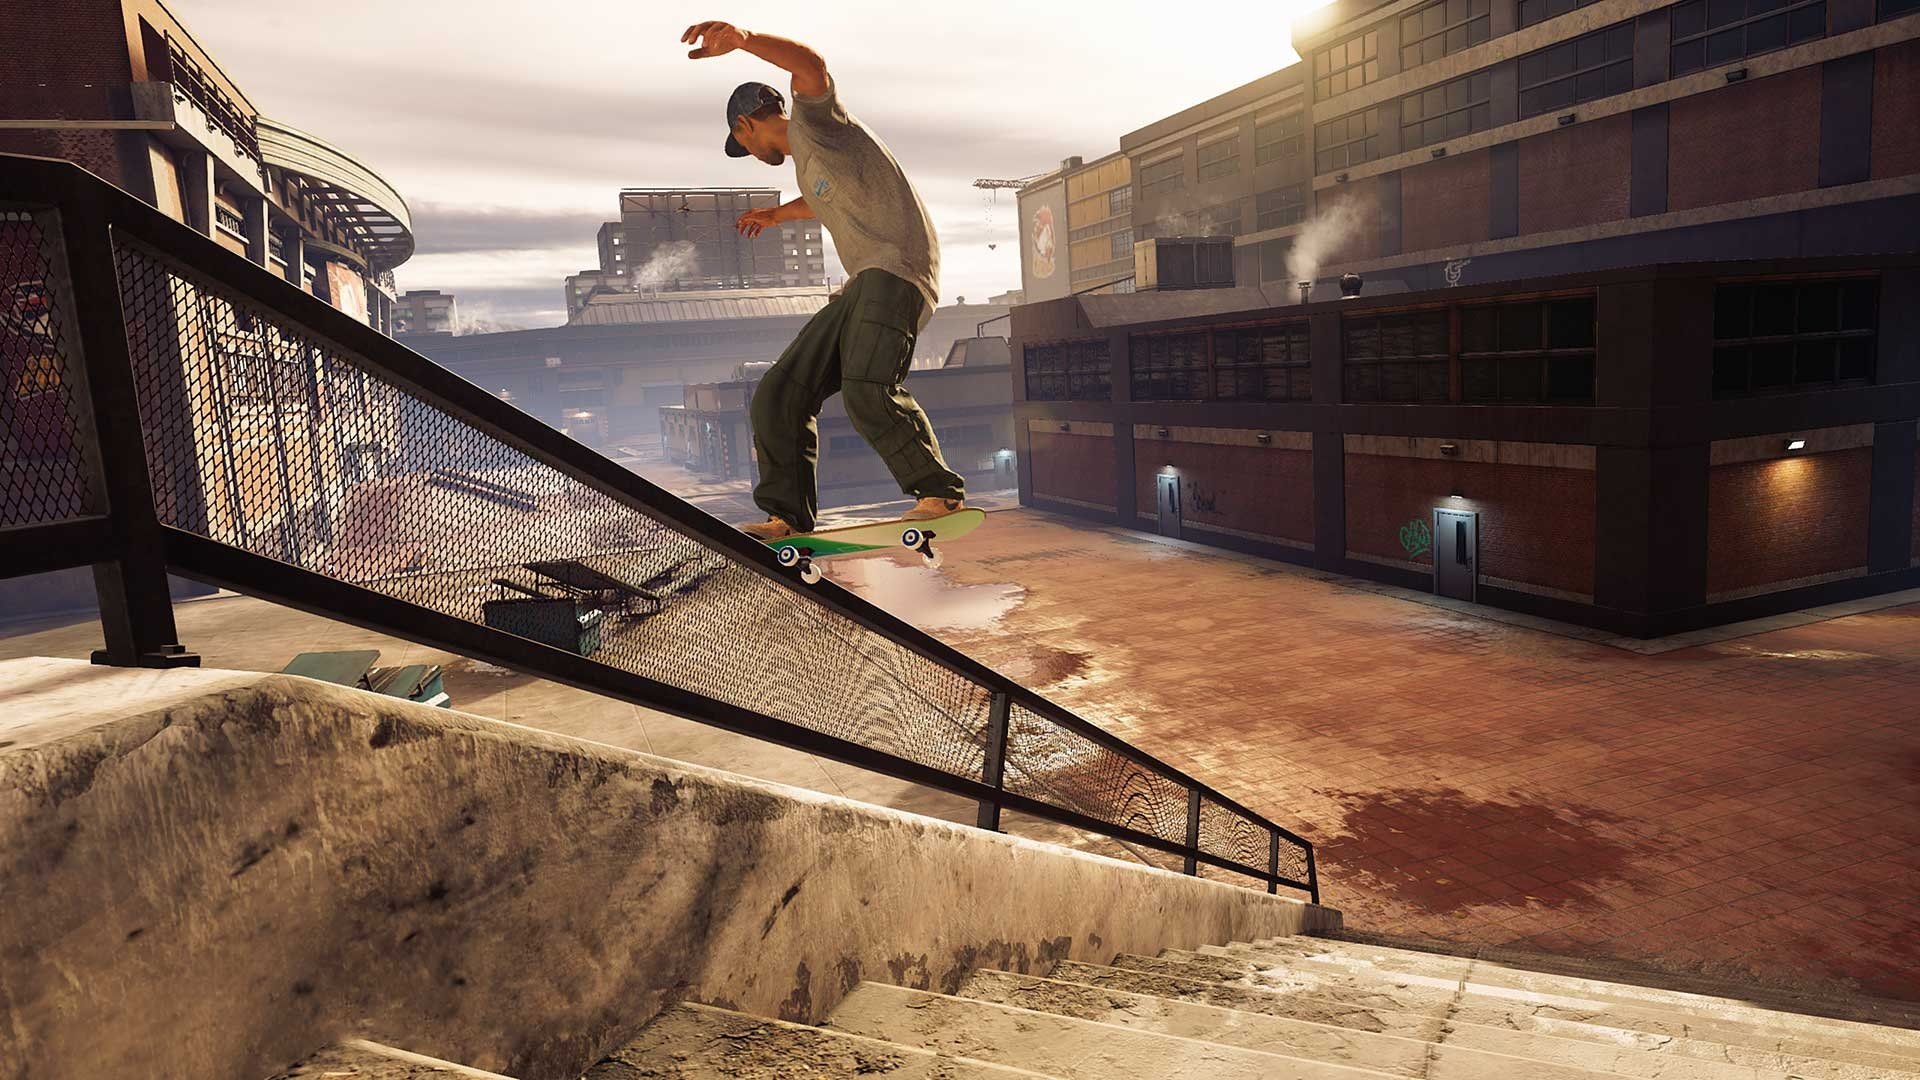 Apparently Skate 4 has been leaked